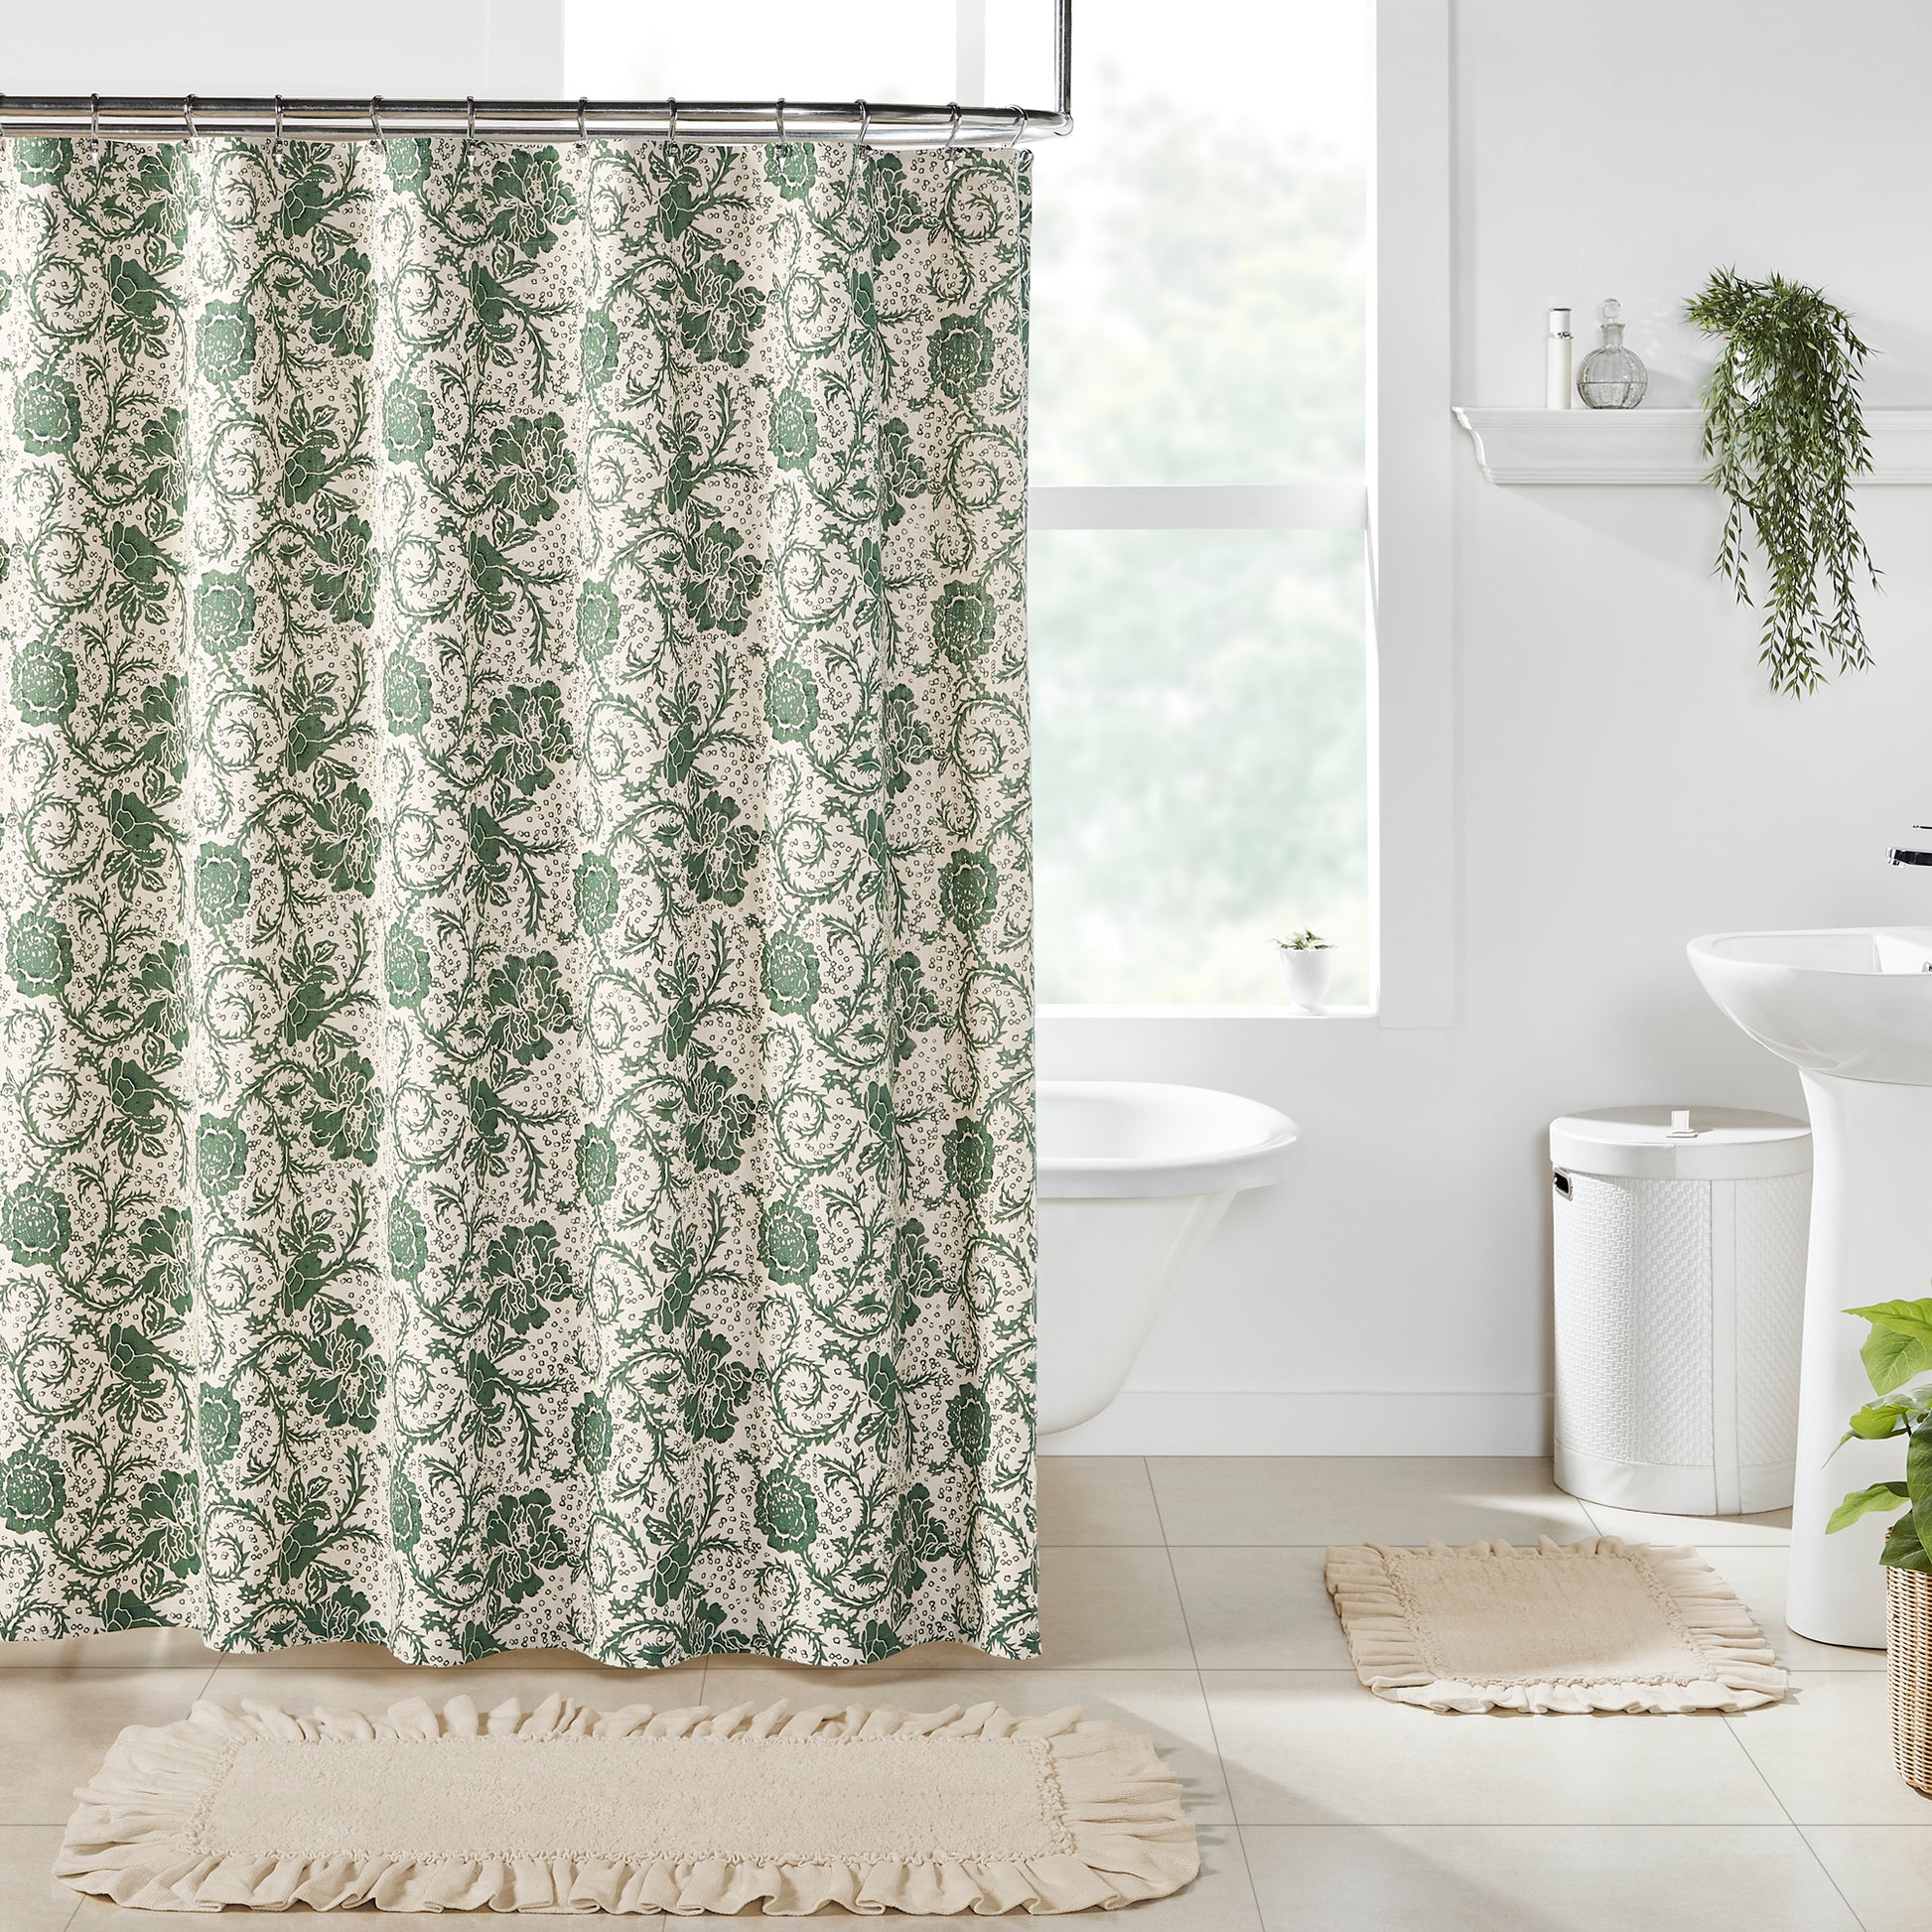 81234-Dorset-Green-Floral-Shower-Curtain-72x72-image-5